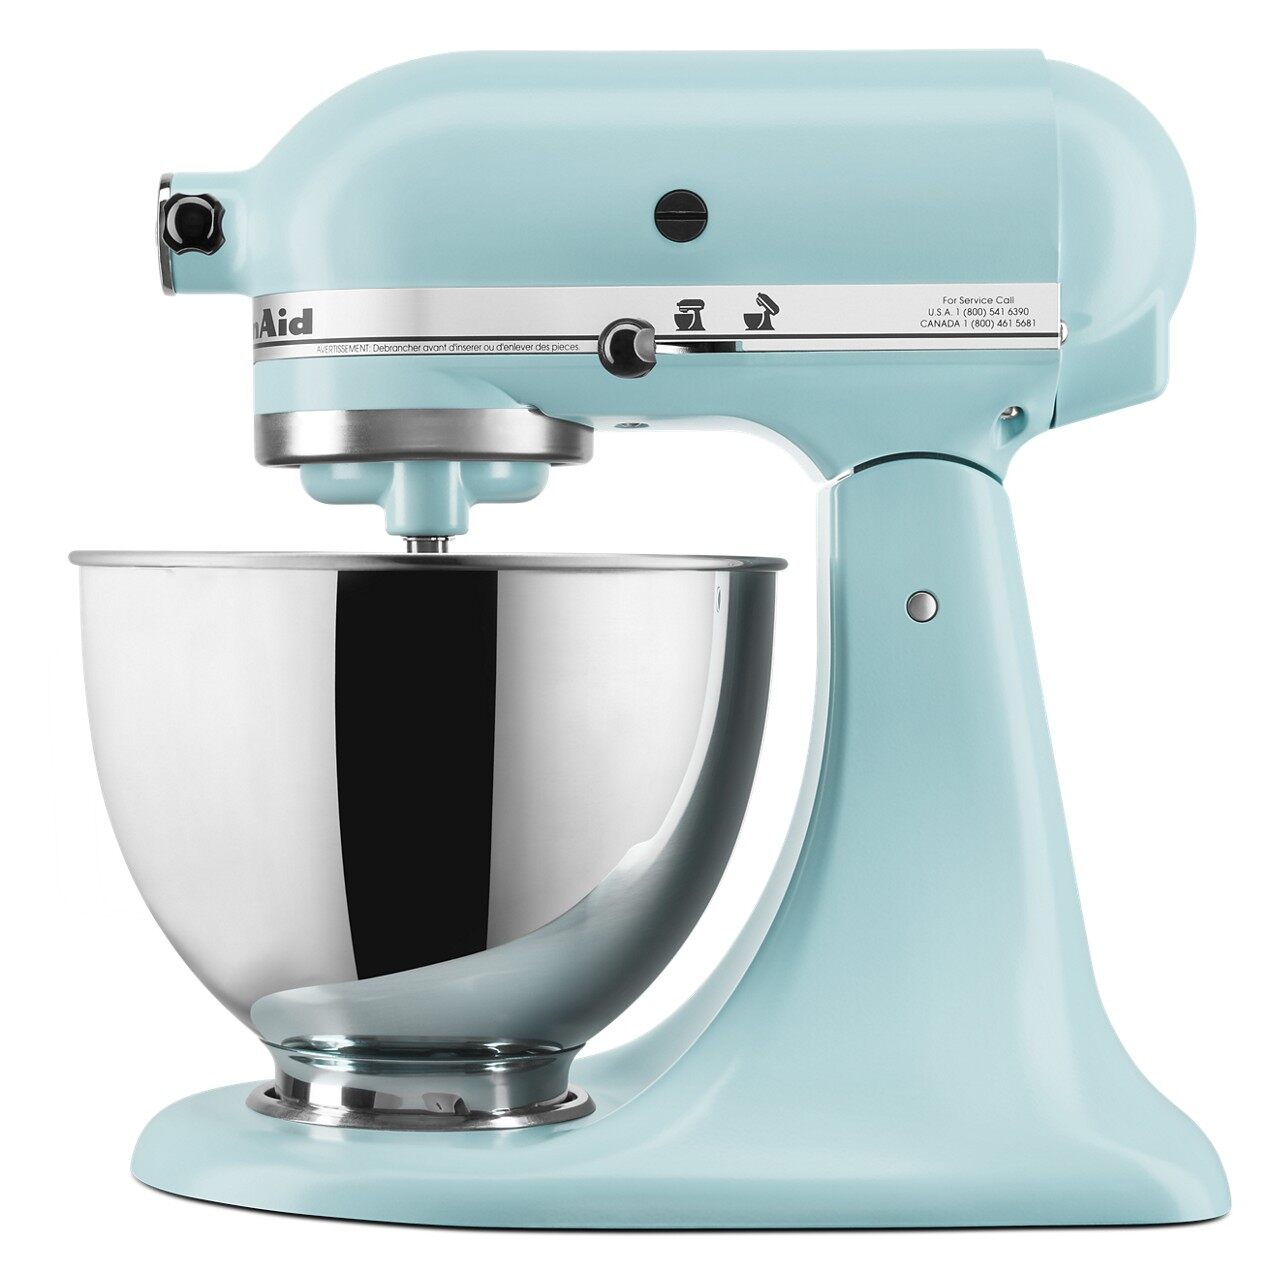 KitchenAid® Deluxe 4.5 Quart Tilt-Head Stand Mixer, 	Mineral Water Blue, KSM97 - image 3 of 9